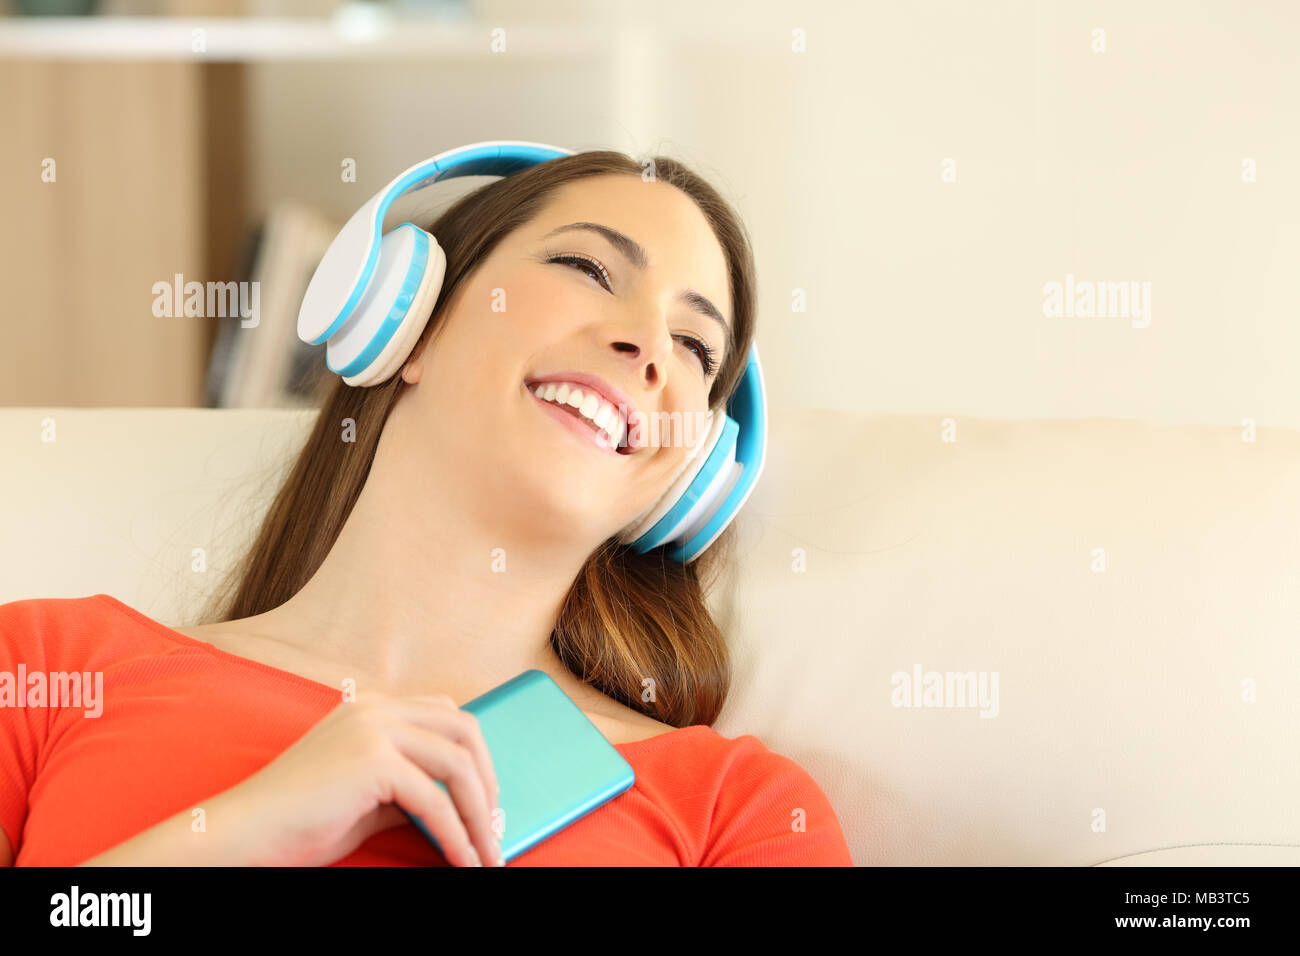 Candid girl wearing headphones listening to music sitting on a couch in the living room at home Stock Photo